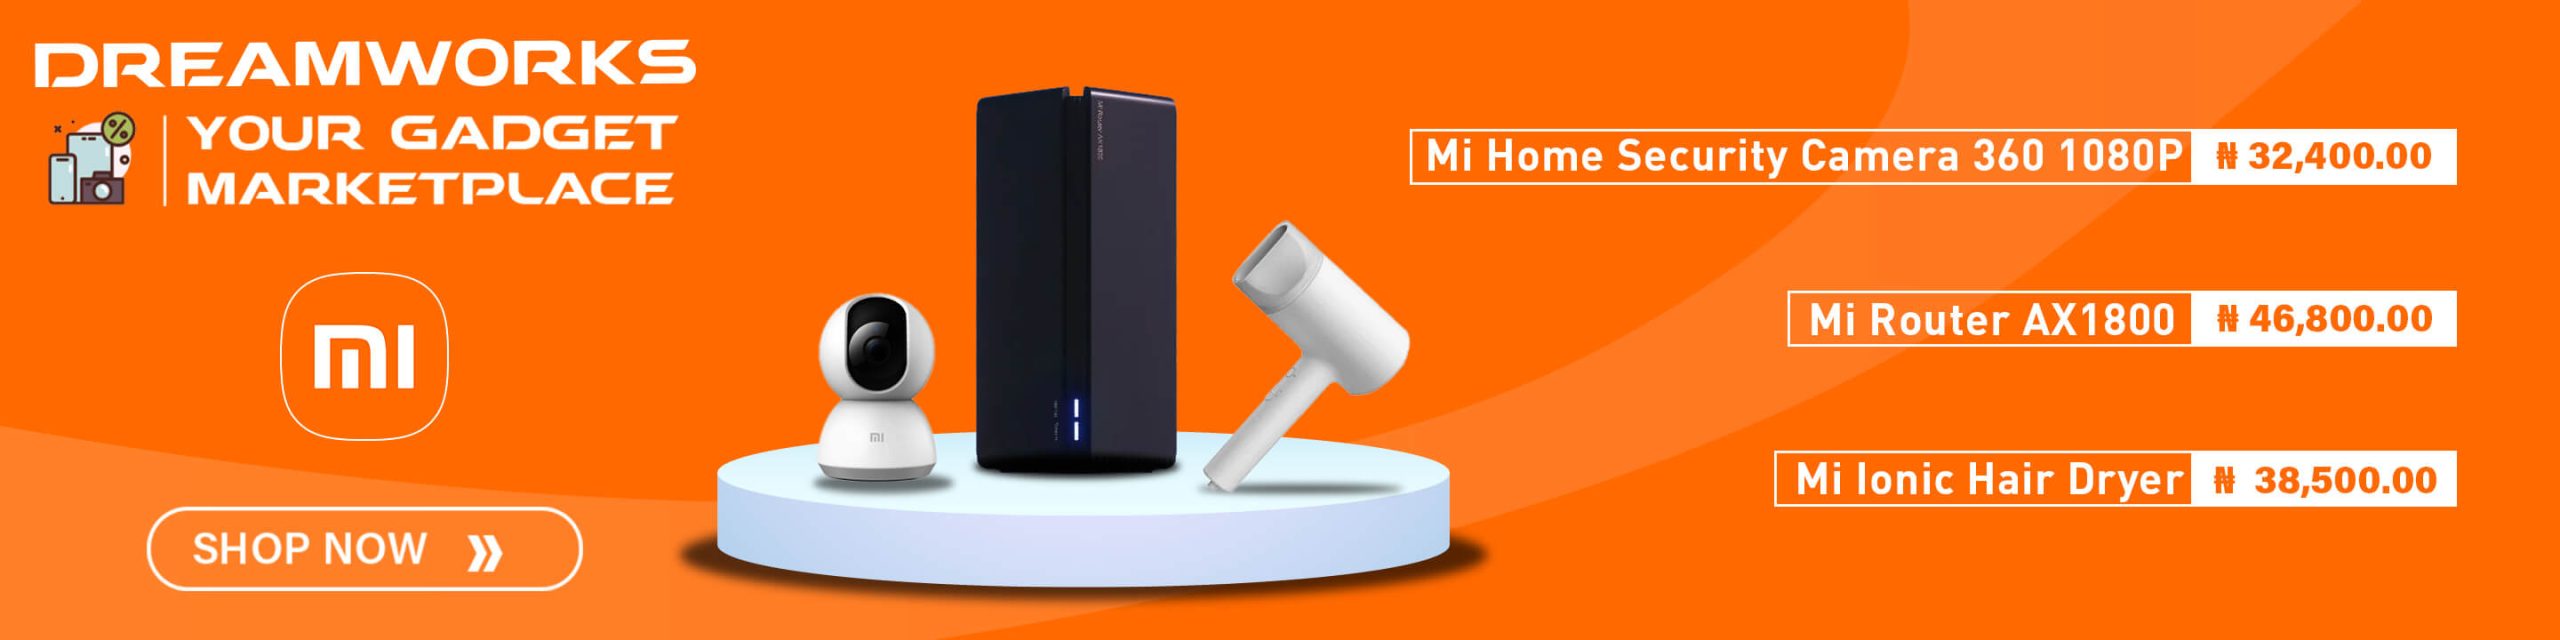 DW XIAOMI PRODUCTS NEW ARRIVAL Cover Banner 5 2880 _720